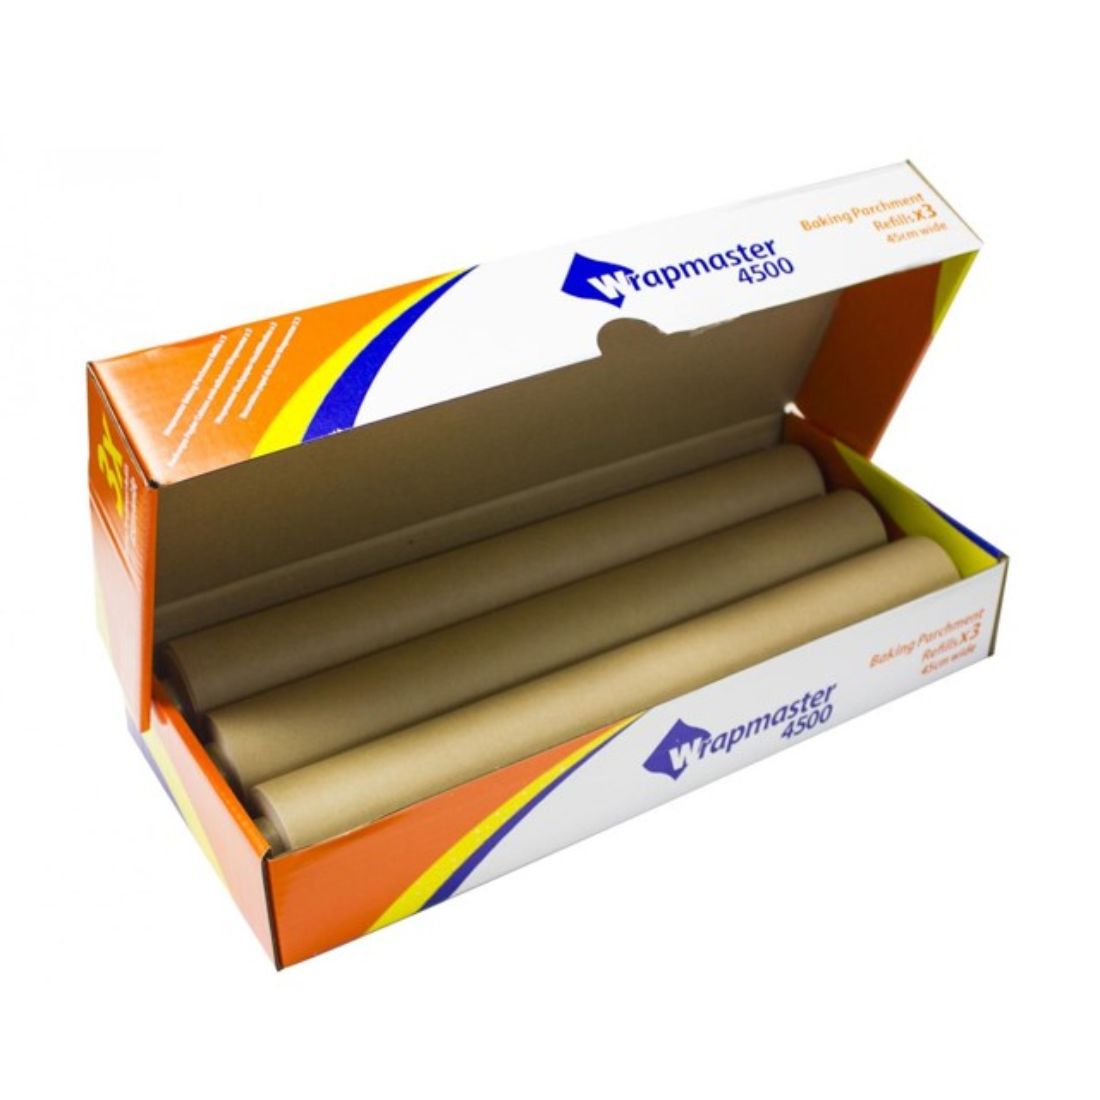 Wrapmaster 4500 Baking Parchment Refill Rolls - 45cm x 50m - Caterclean  Supplies